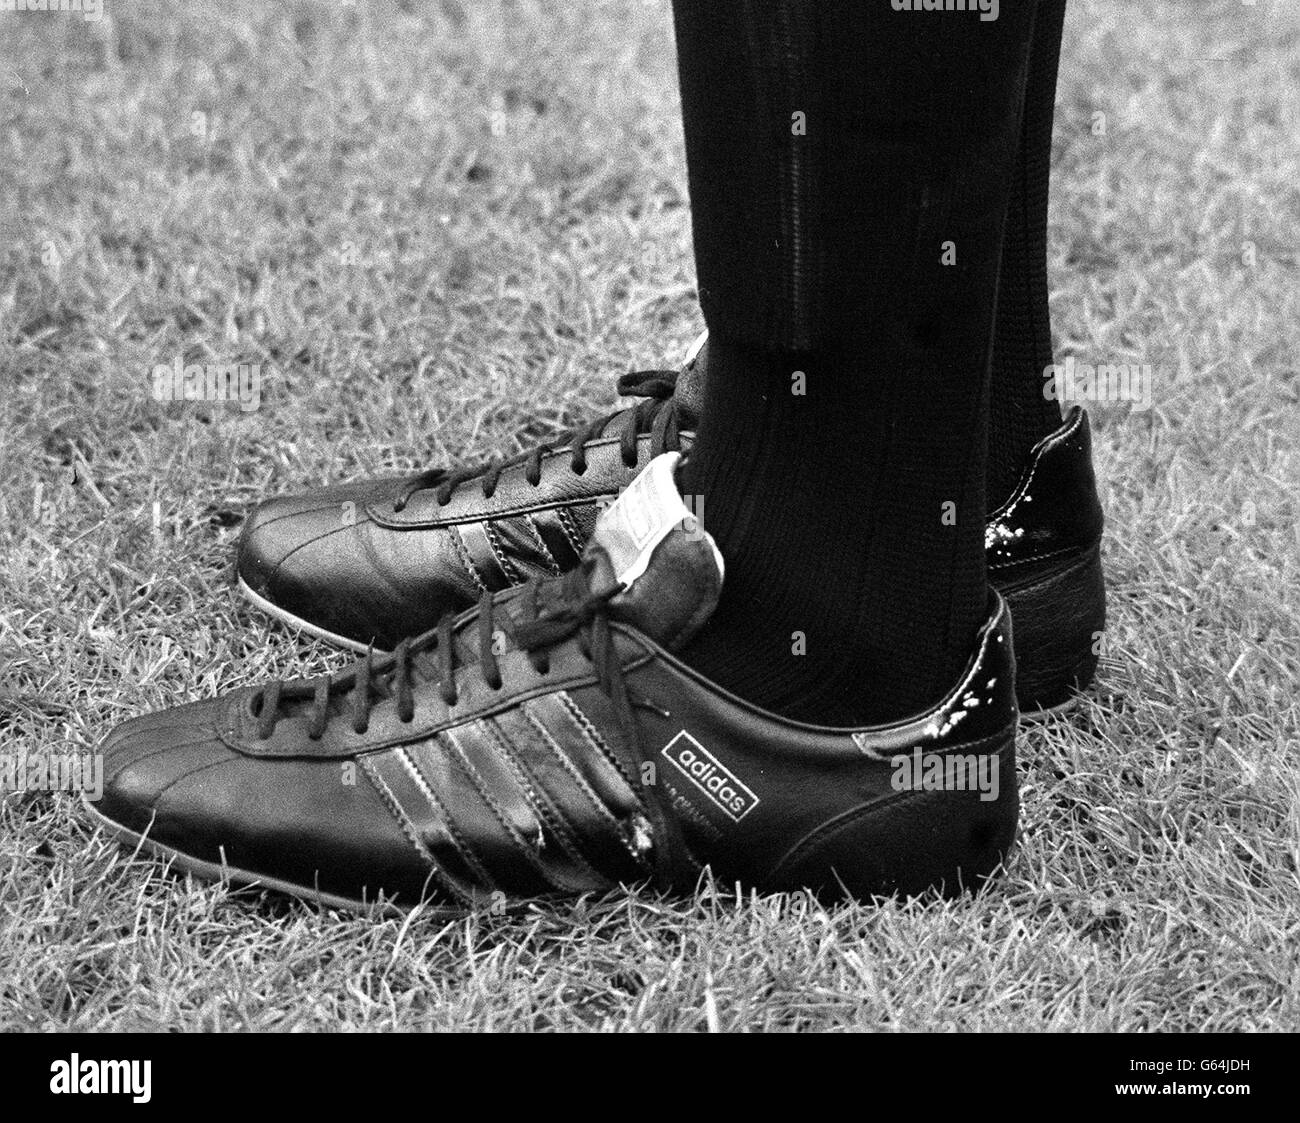 Adidas football boots Black and White Stock Photos & Images - Alamy